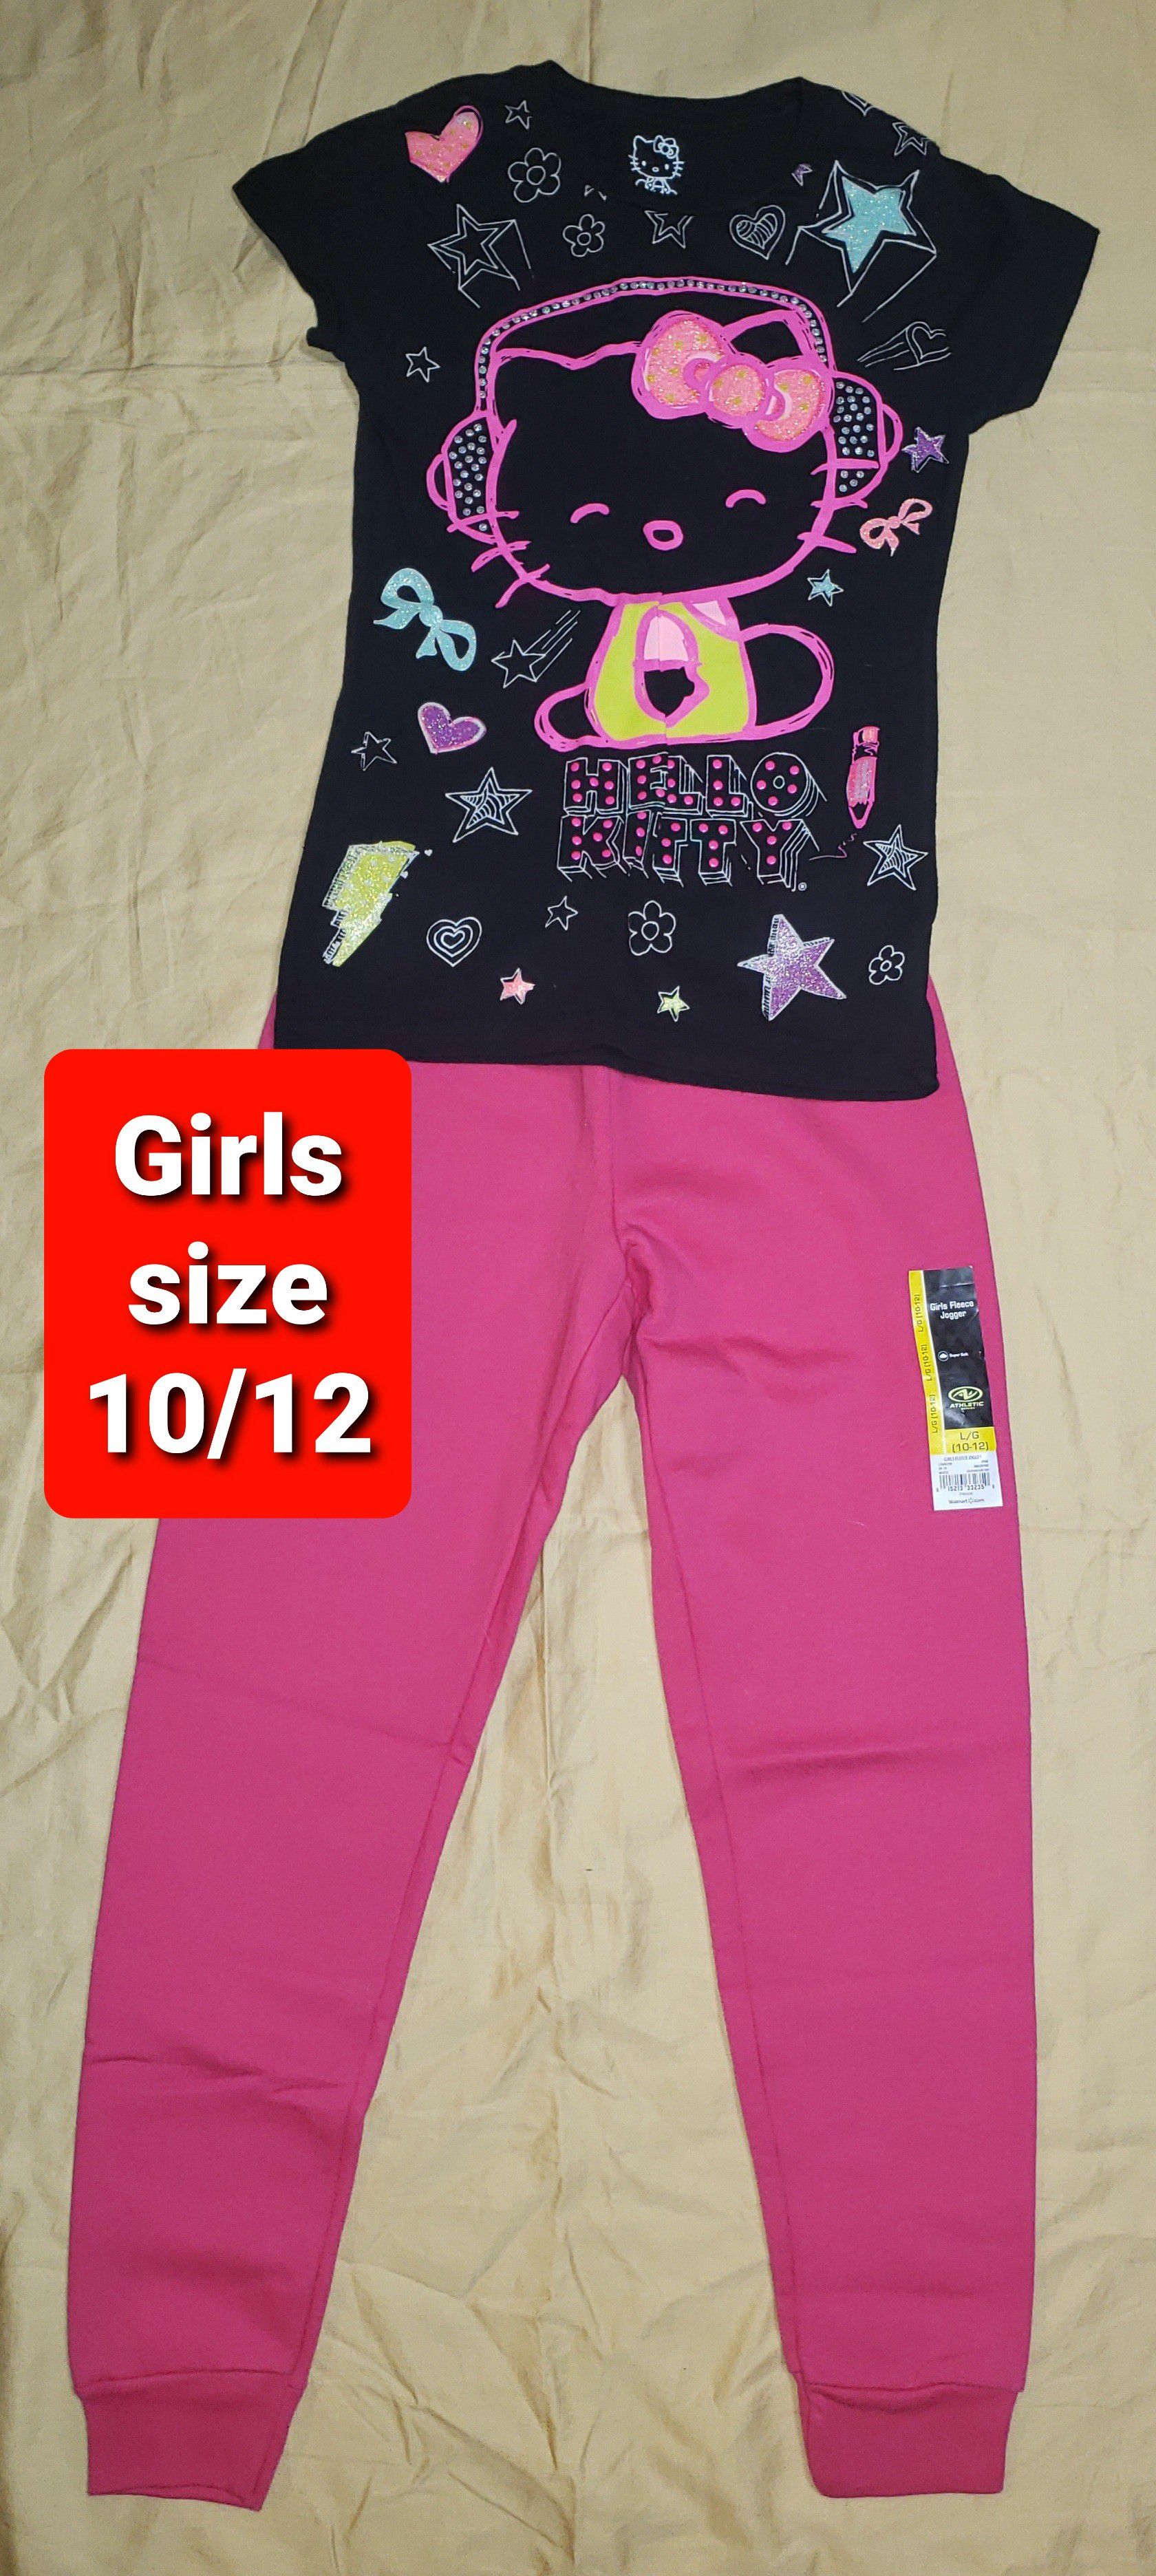 Girls size 10 / 12 Clothes Black Hello Kitty Shirt with Pink Sweatpants (#477)